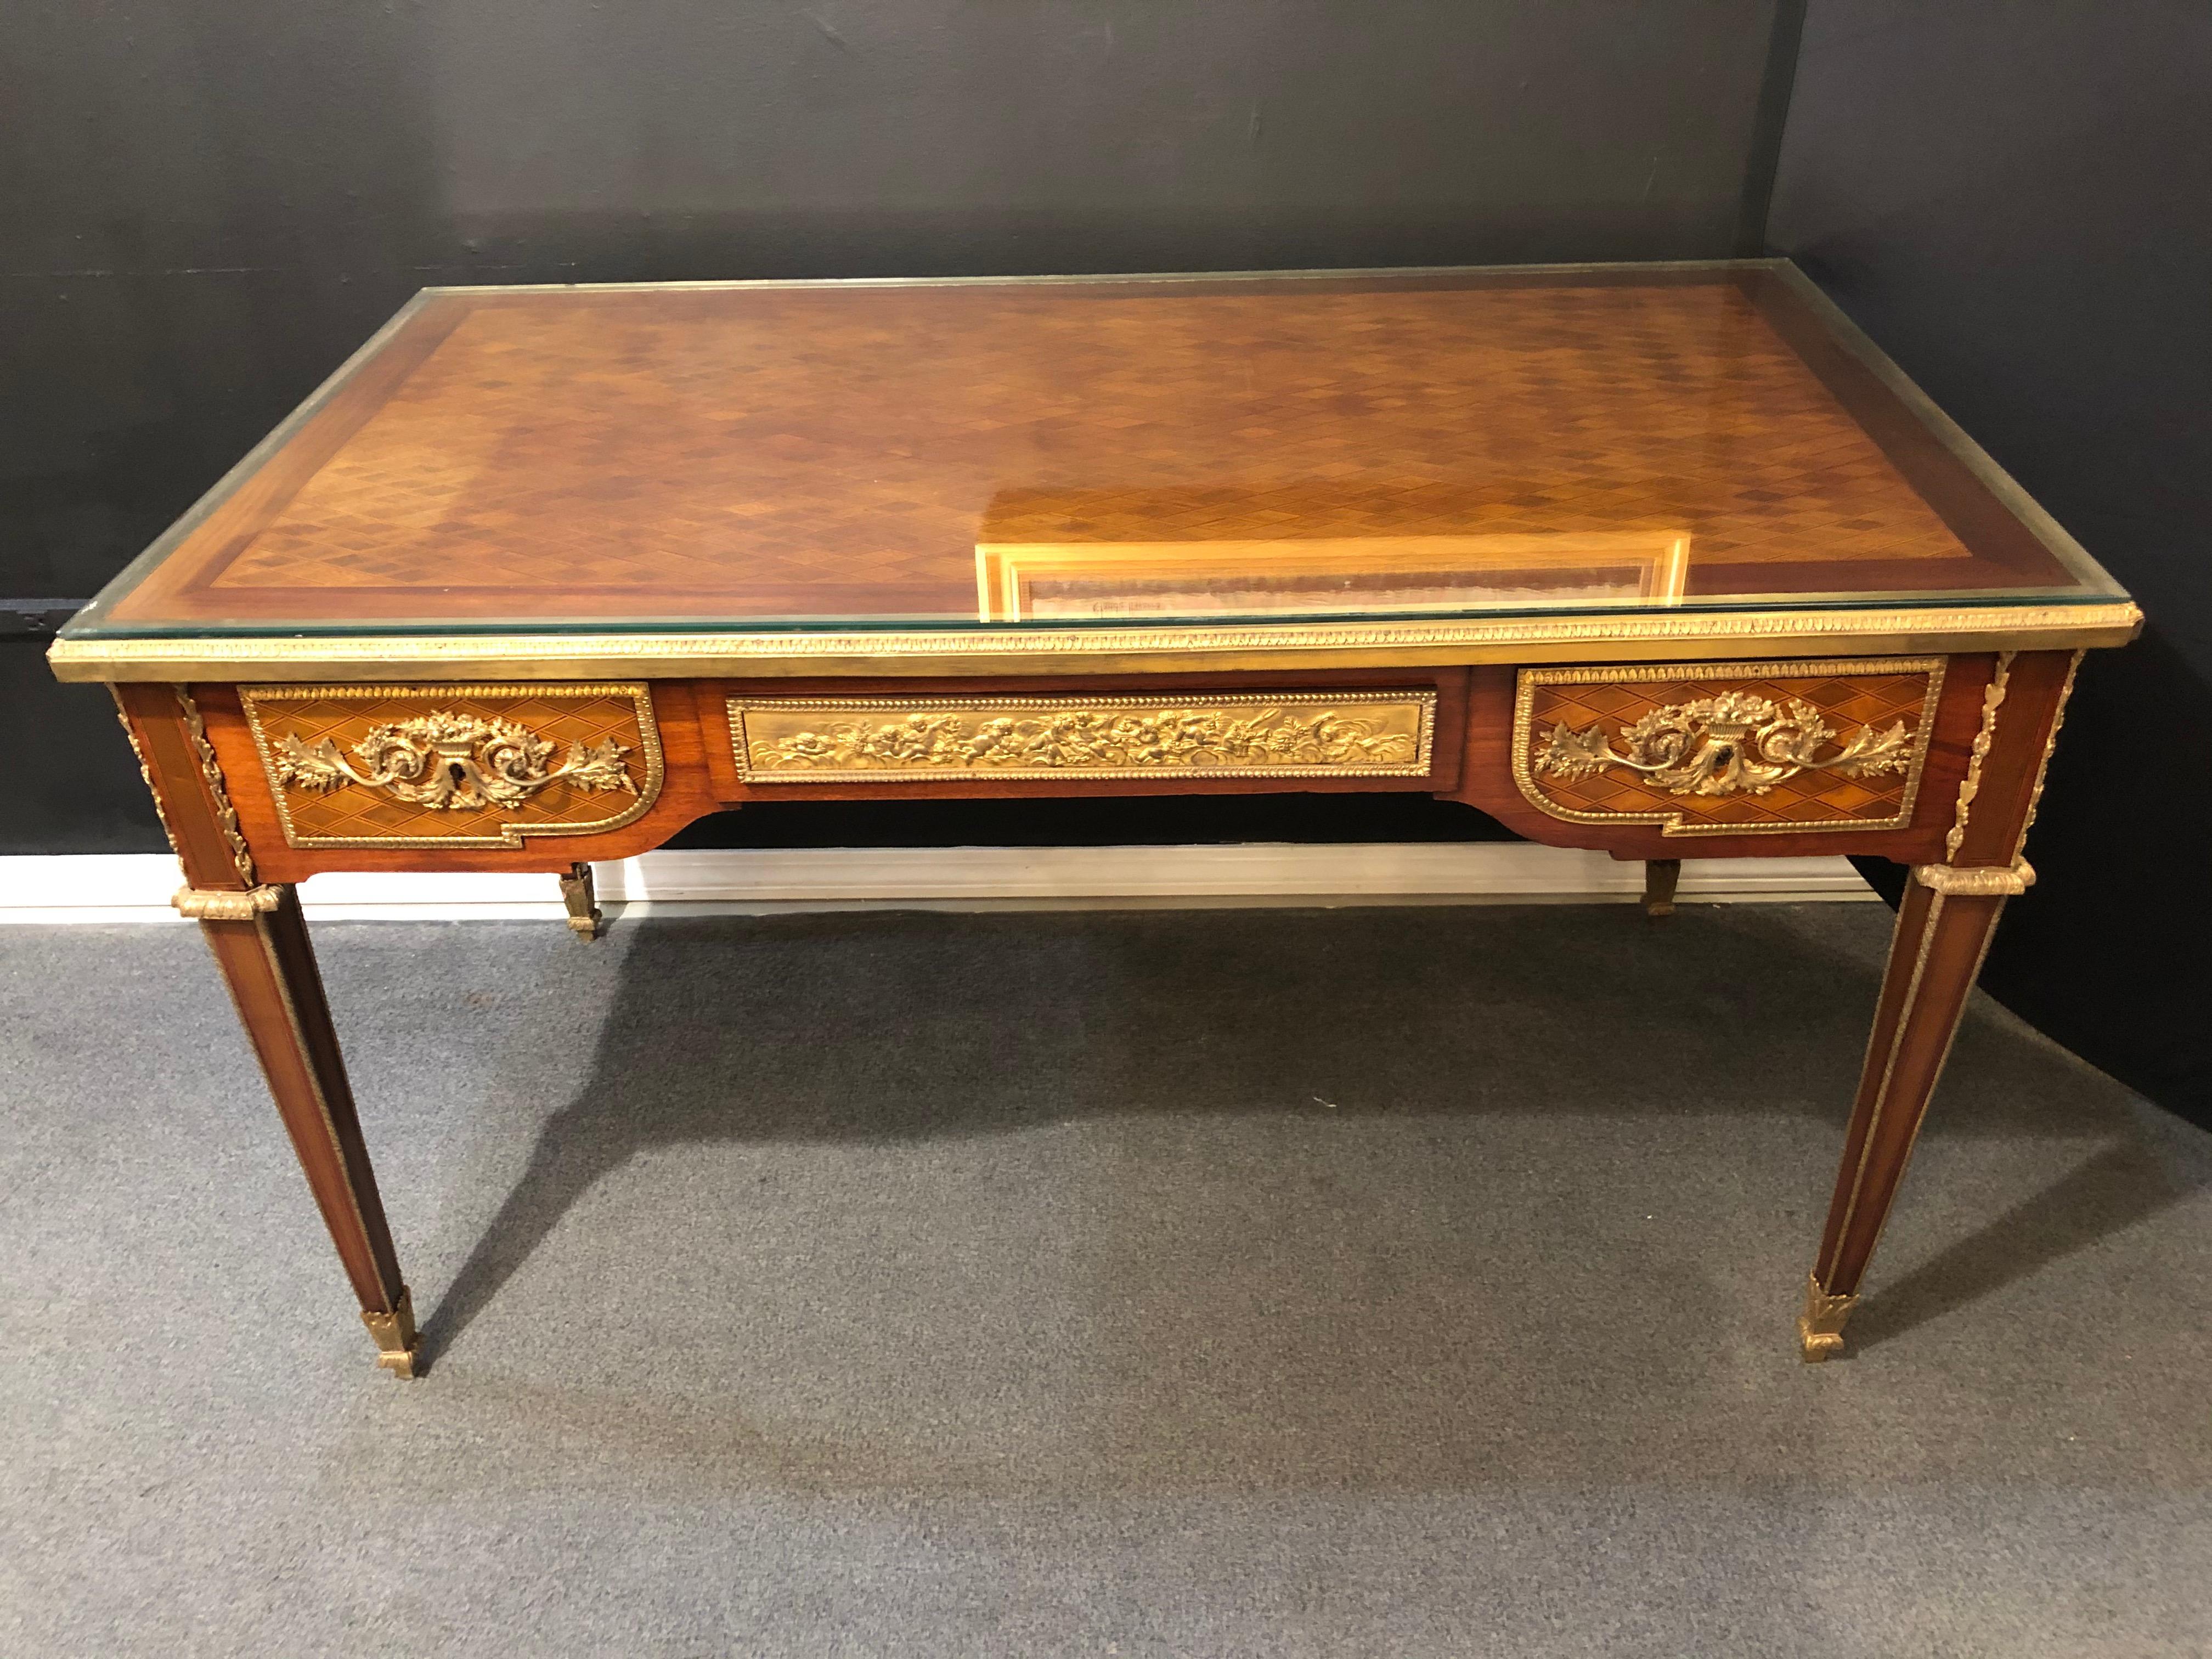 Louis XVI style 19th-20th century bronze mounted desk manner Linke. This spectacular French desk can sit center room as it is finished on all sides with its stunning parquetry inlays and bronze mounts. The table top covered in a beveled glass.
ES